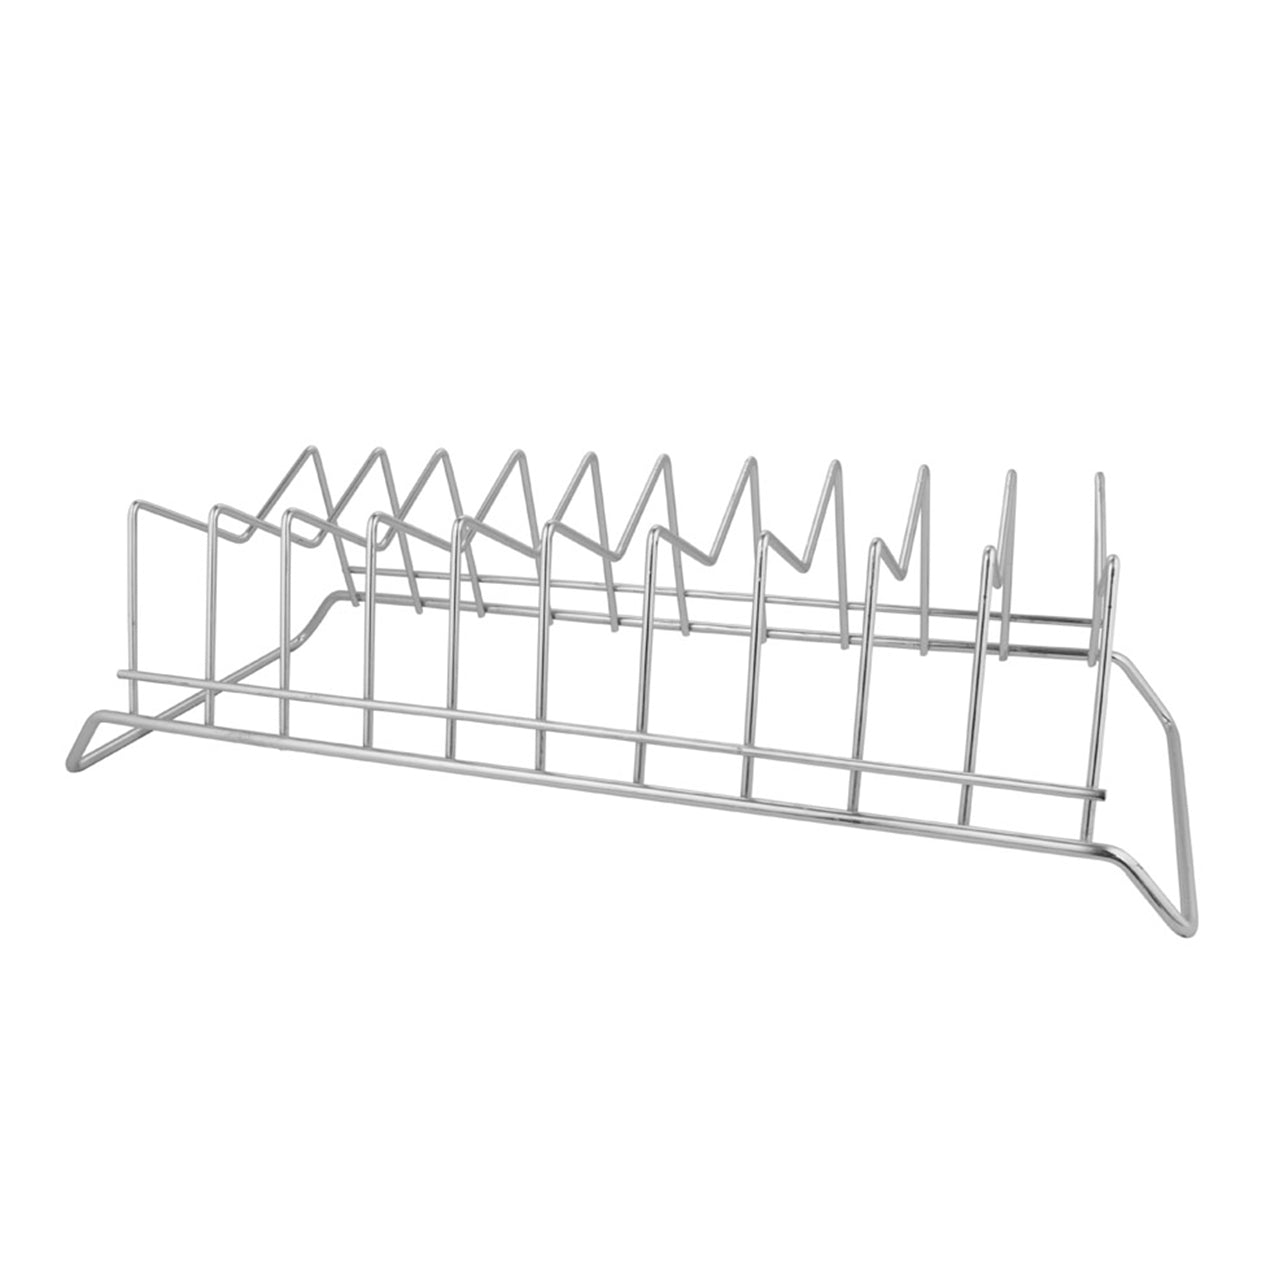 KOWS -12 PCS LARGE PLATE STAND-PTS 003